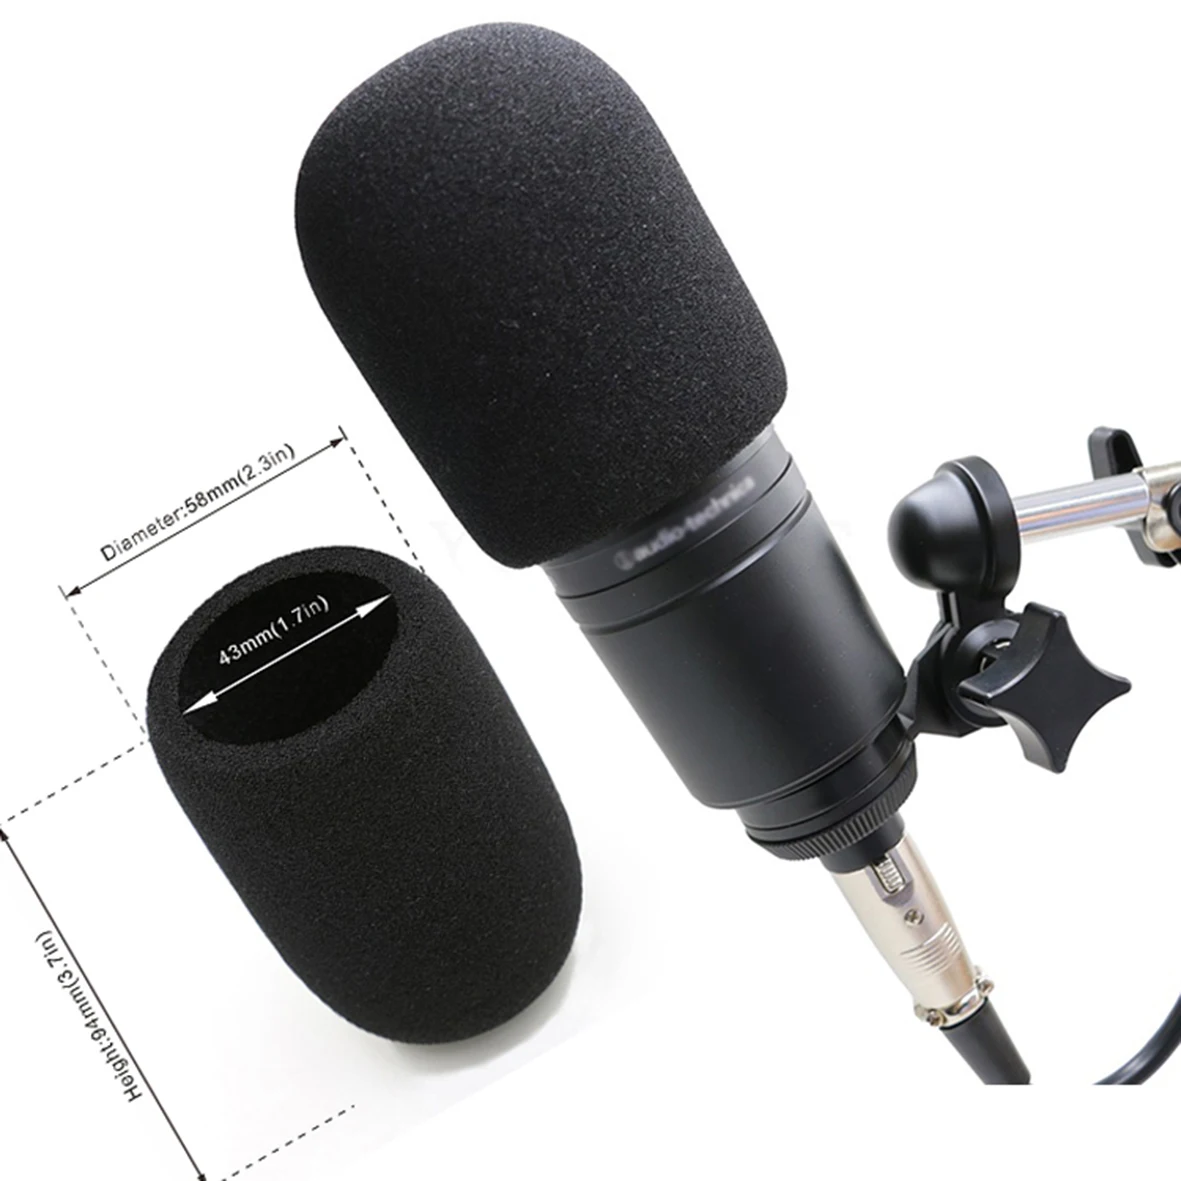 AT2035 Pop Filter Foam Cover Windscreen Mic Wind Cover Customized for Audio Technica AT2035 Condenser Microphone to Blocks Out Plosives